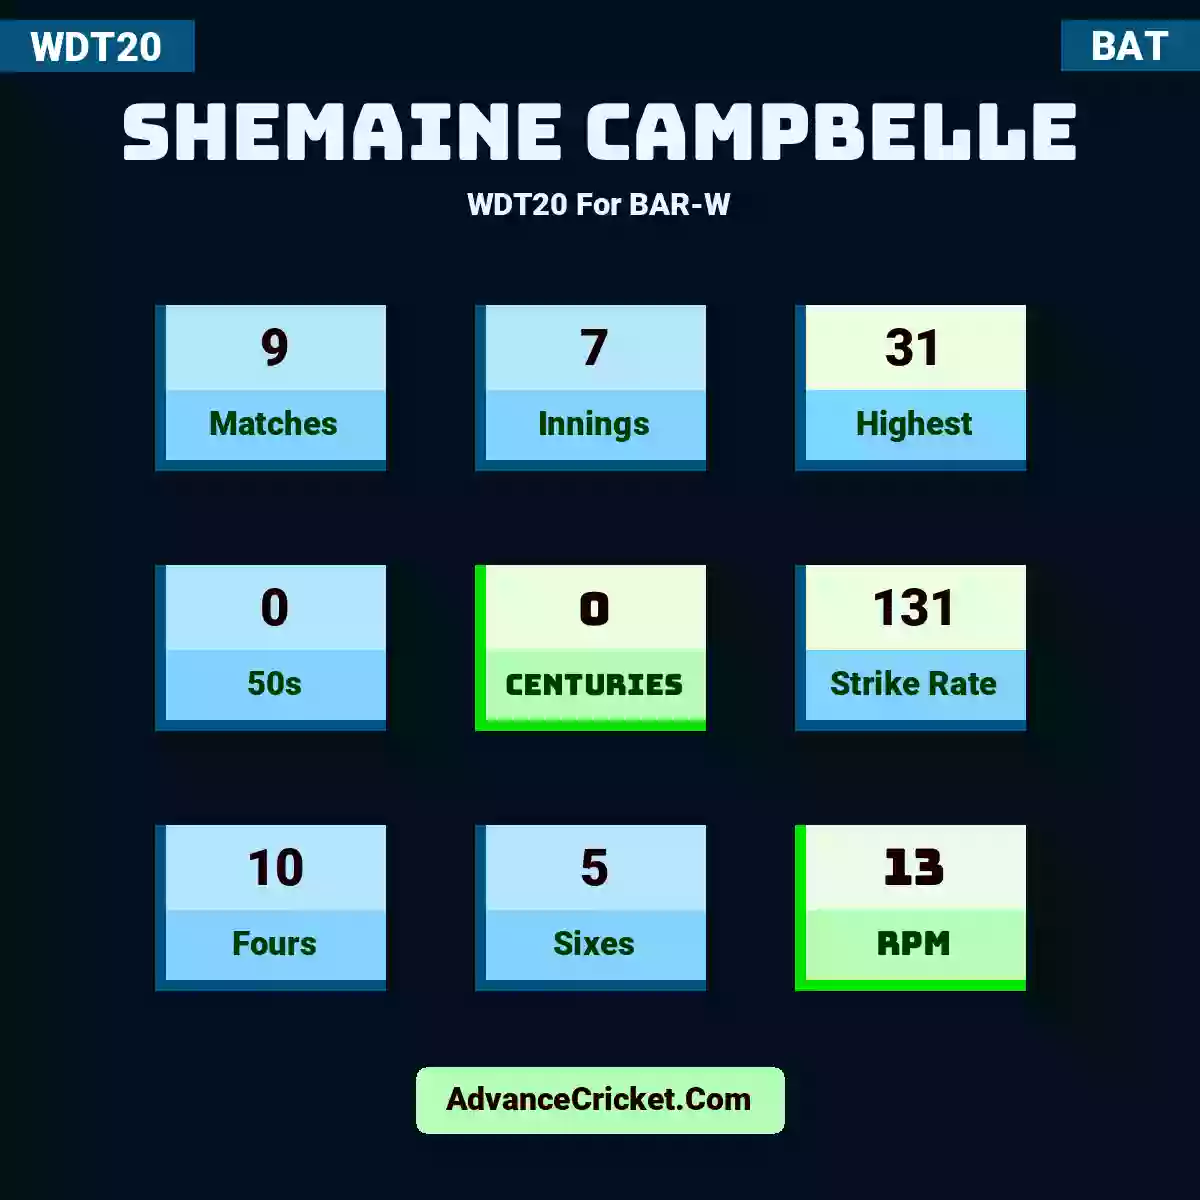 Shemaine Campbelle WDT20  For BAR-W, Shemaine Campbelle played 9 matches, scored 31 runs as highest, 0 half-centuries, and 0 centuries, with a strike rate of 131. S.Campbelle hit 10 fours and 5 sixes, with an RPM of 13.